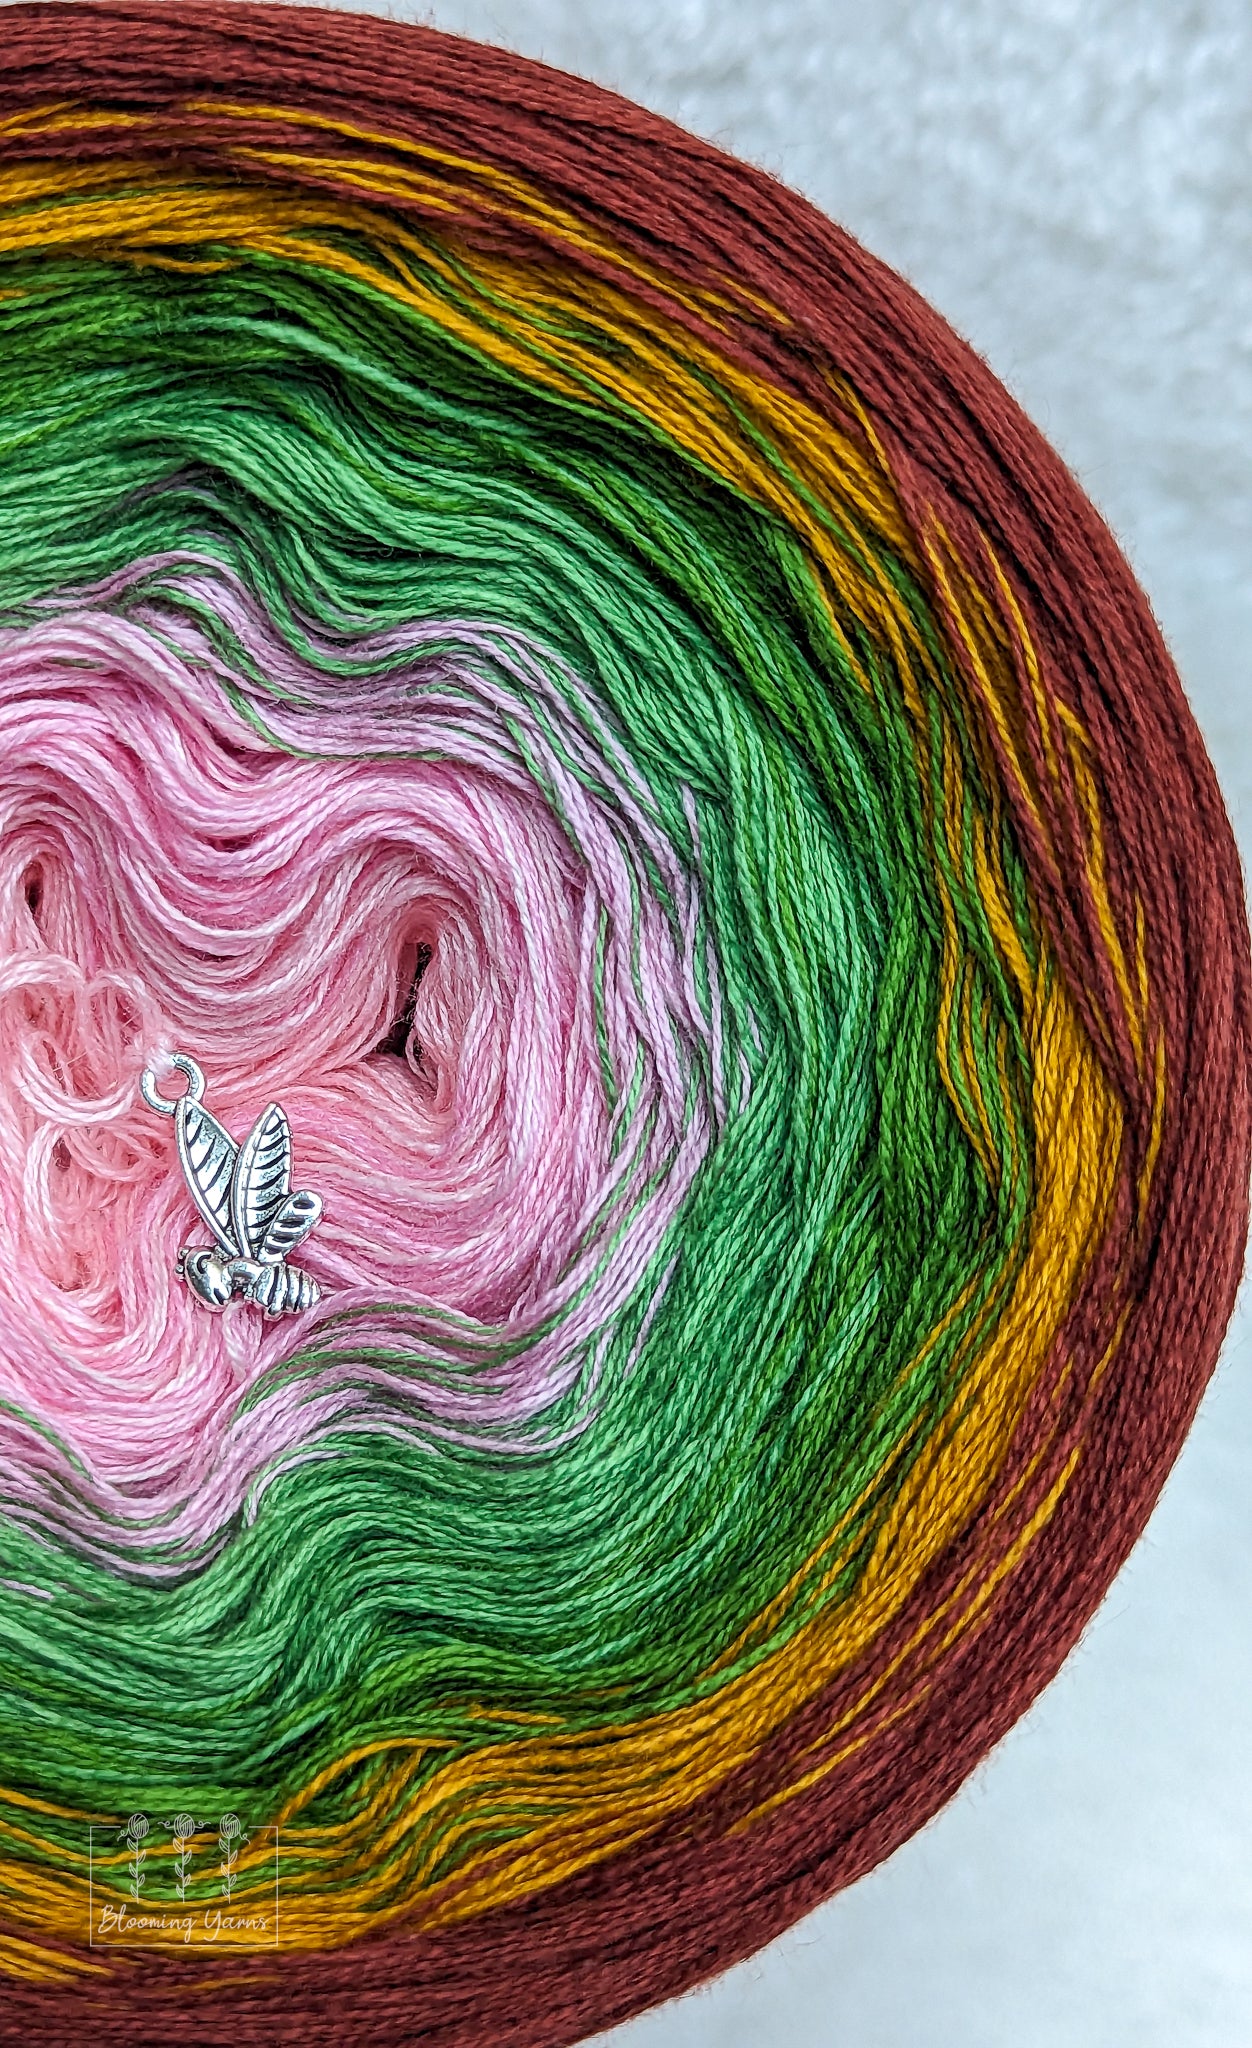 "Rose bushes" gradient ombre yarn cake created by Ancy-Fancy